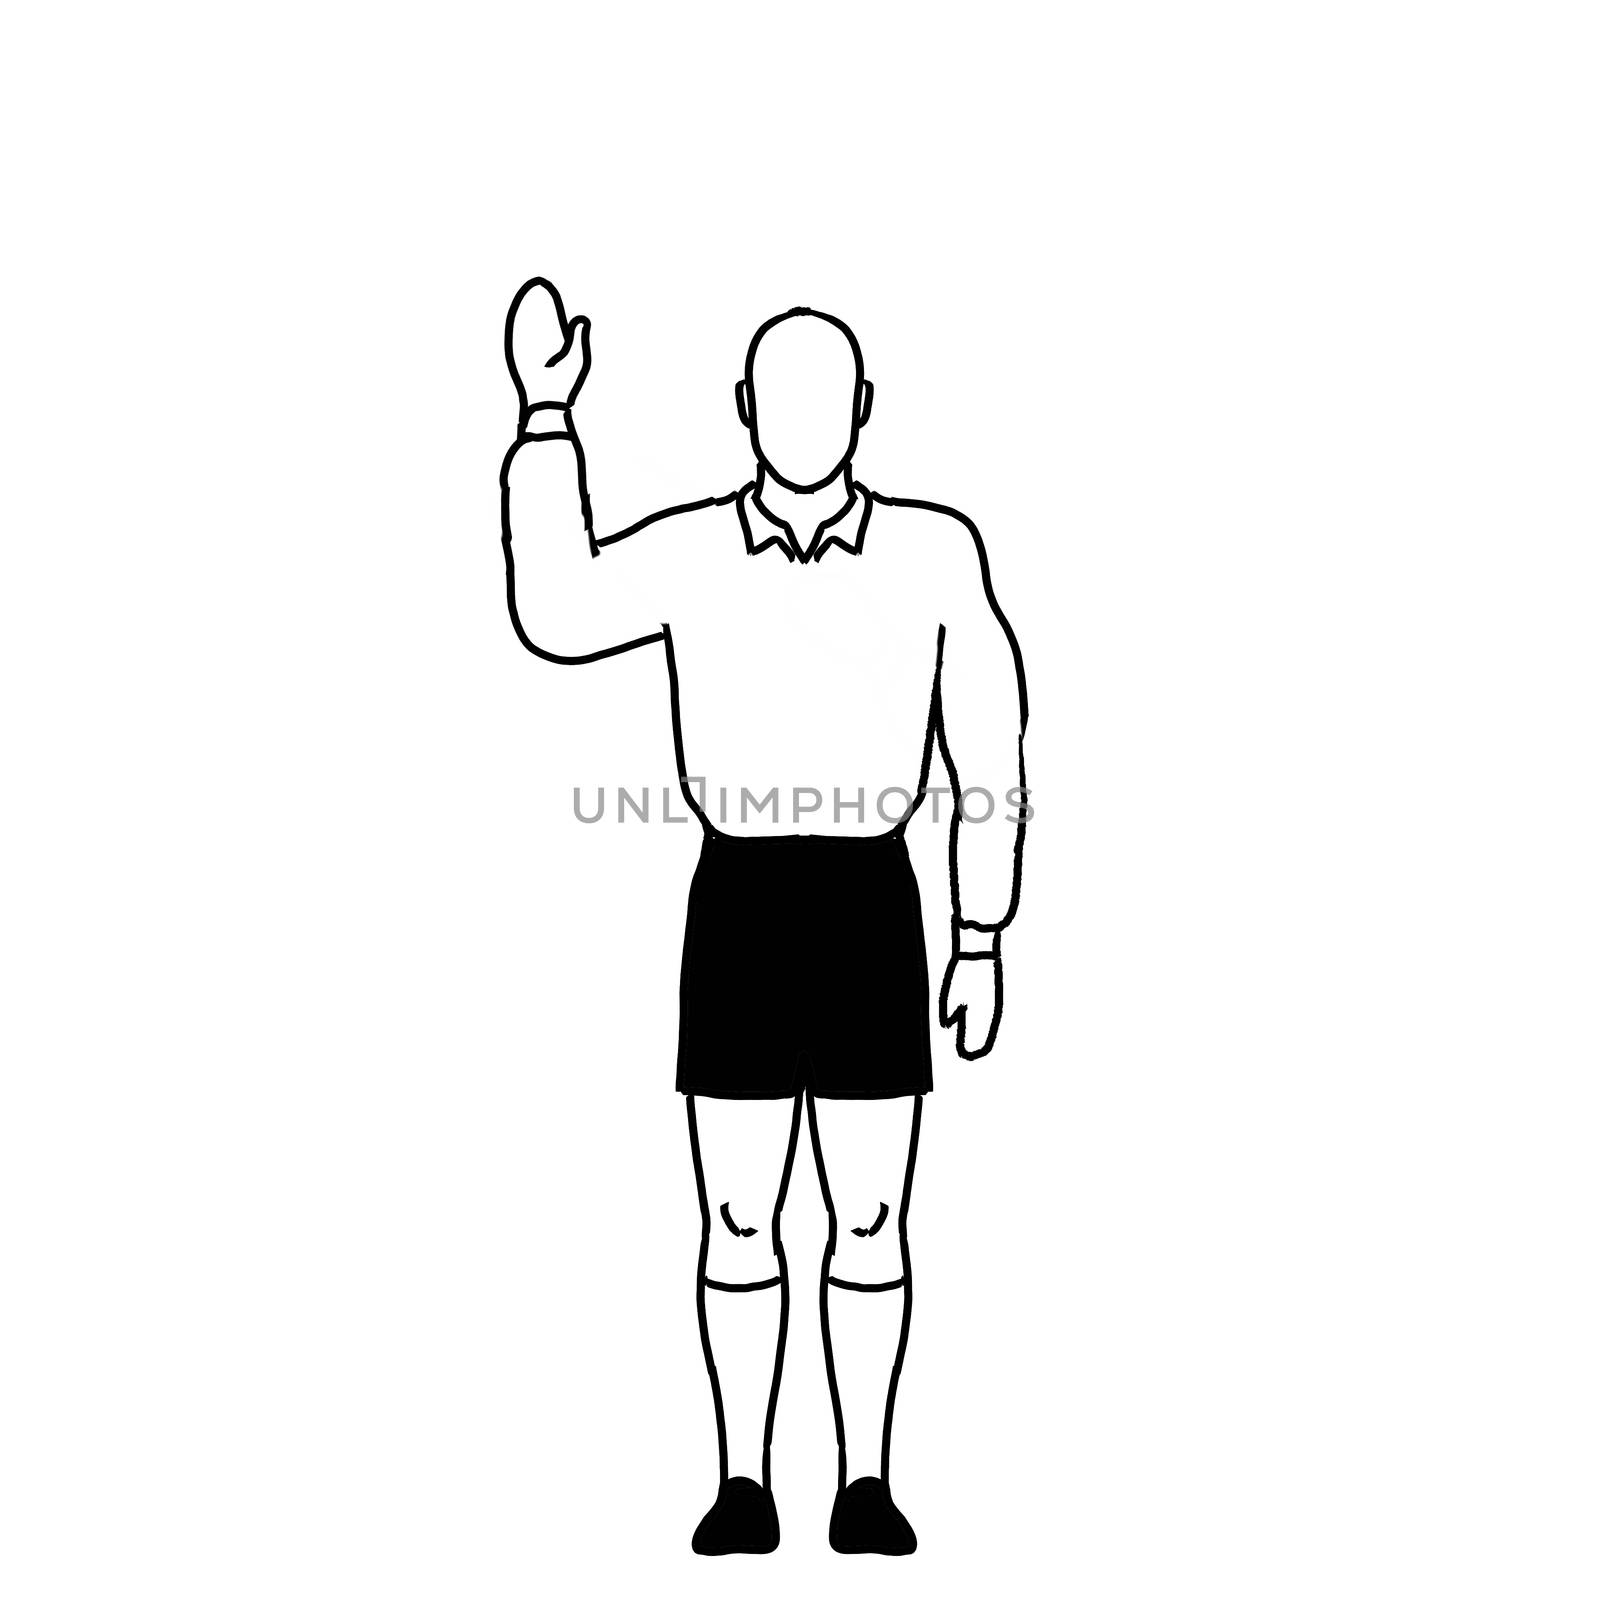 Retro style line drawing illustration showing a rugby referee with penalty free kick hand signal on isolated background in black and white.